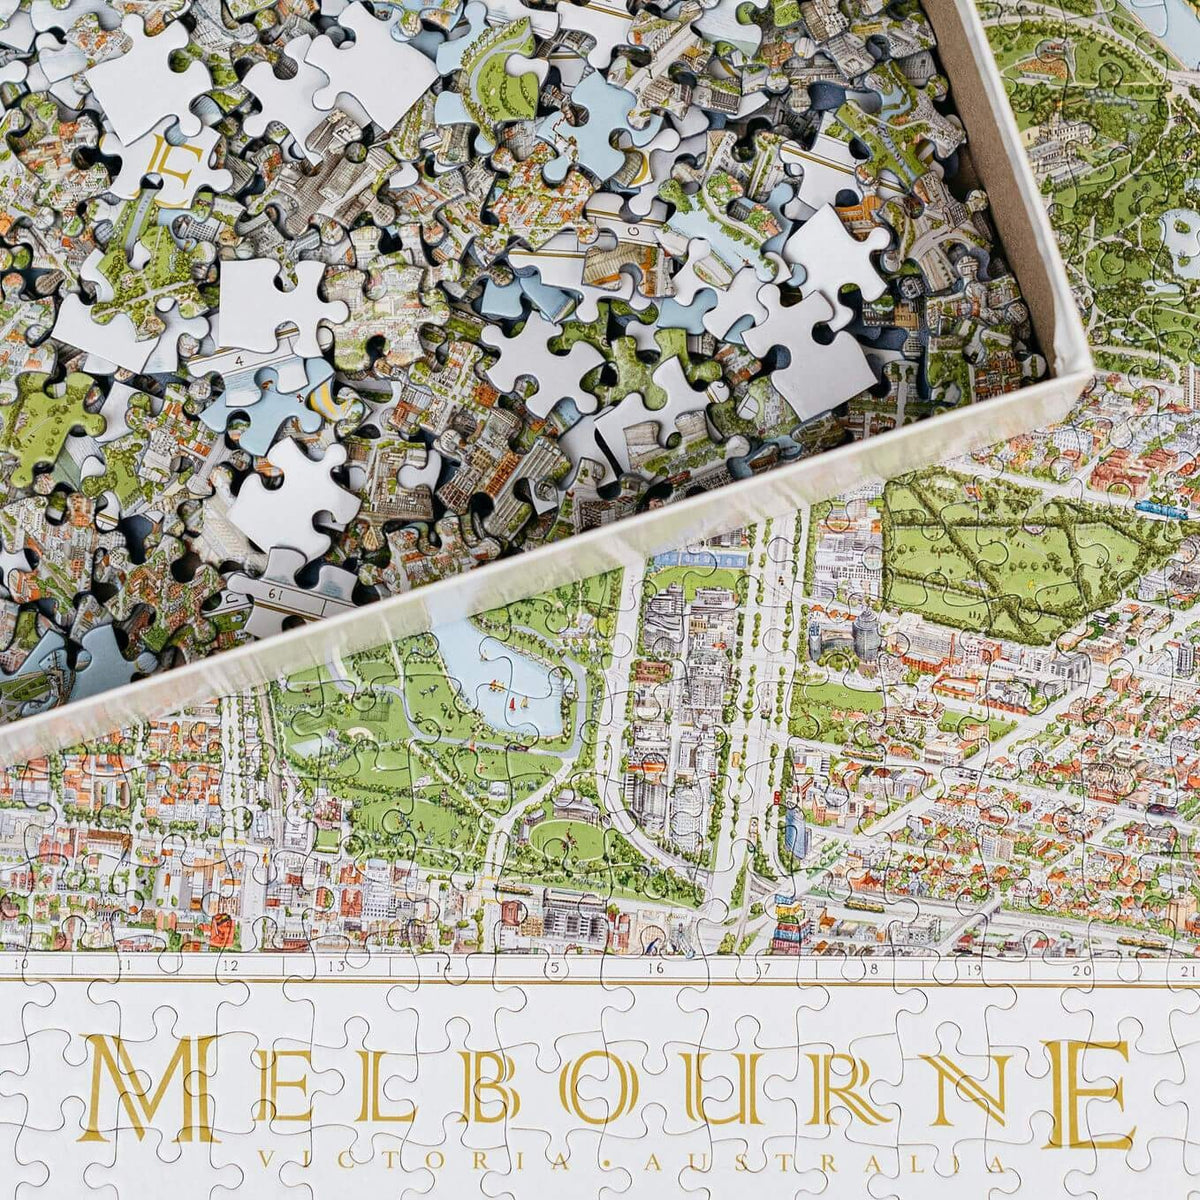 The Melbourne Map 1,000-piece jigsaw puzzle. The image shows a close up of the &quot;Melbourne&quot; name title and the surrounding detail and in the top left corner is the open box with loose pieces. 